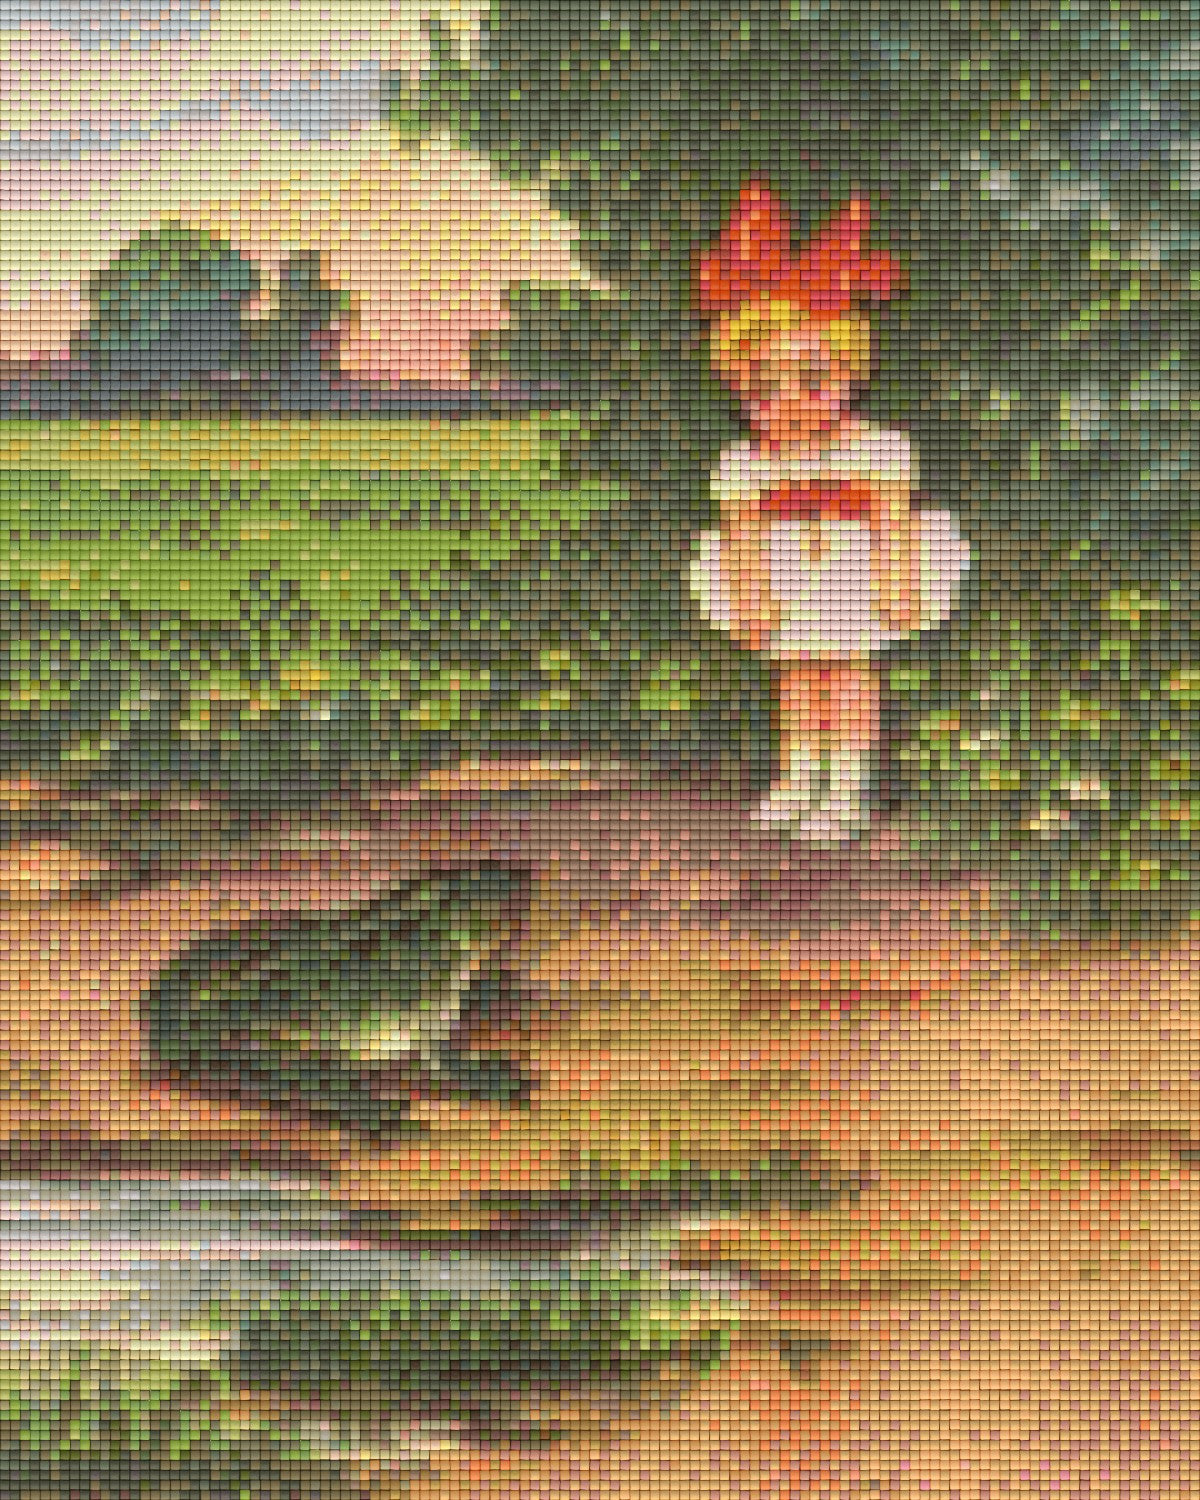 Pixelhobby Classic Set - The girl and the frog